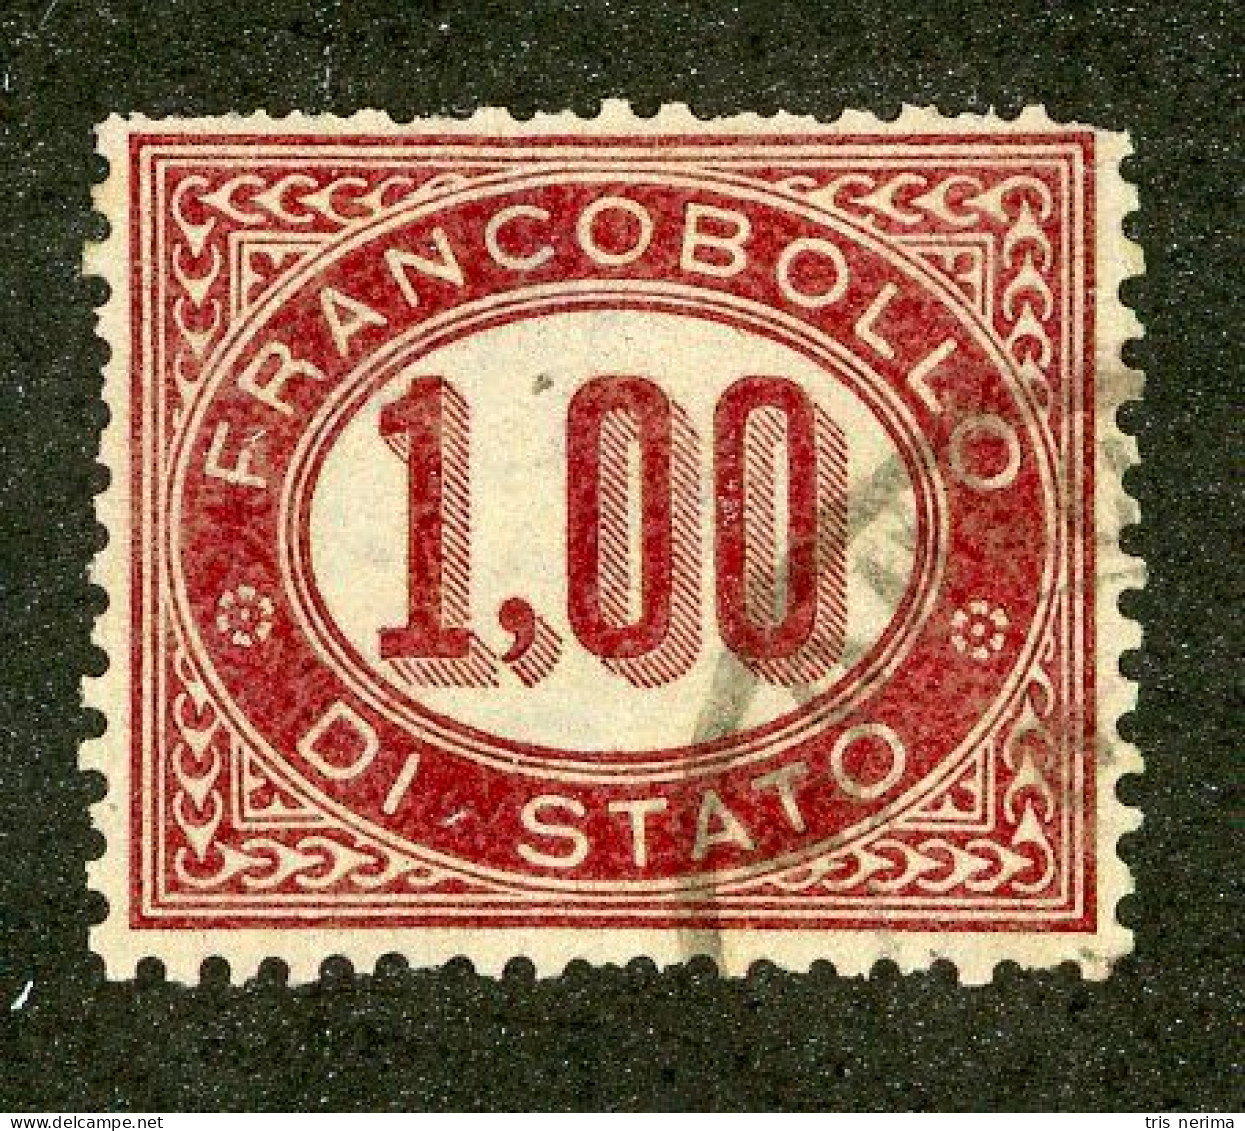 656 Italy 1875 Scott #O5 Used (Lower Bids 20% Off) - Officials